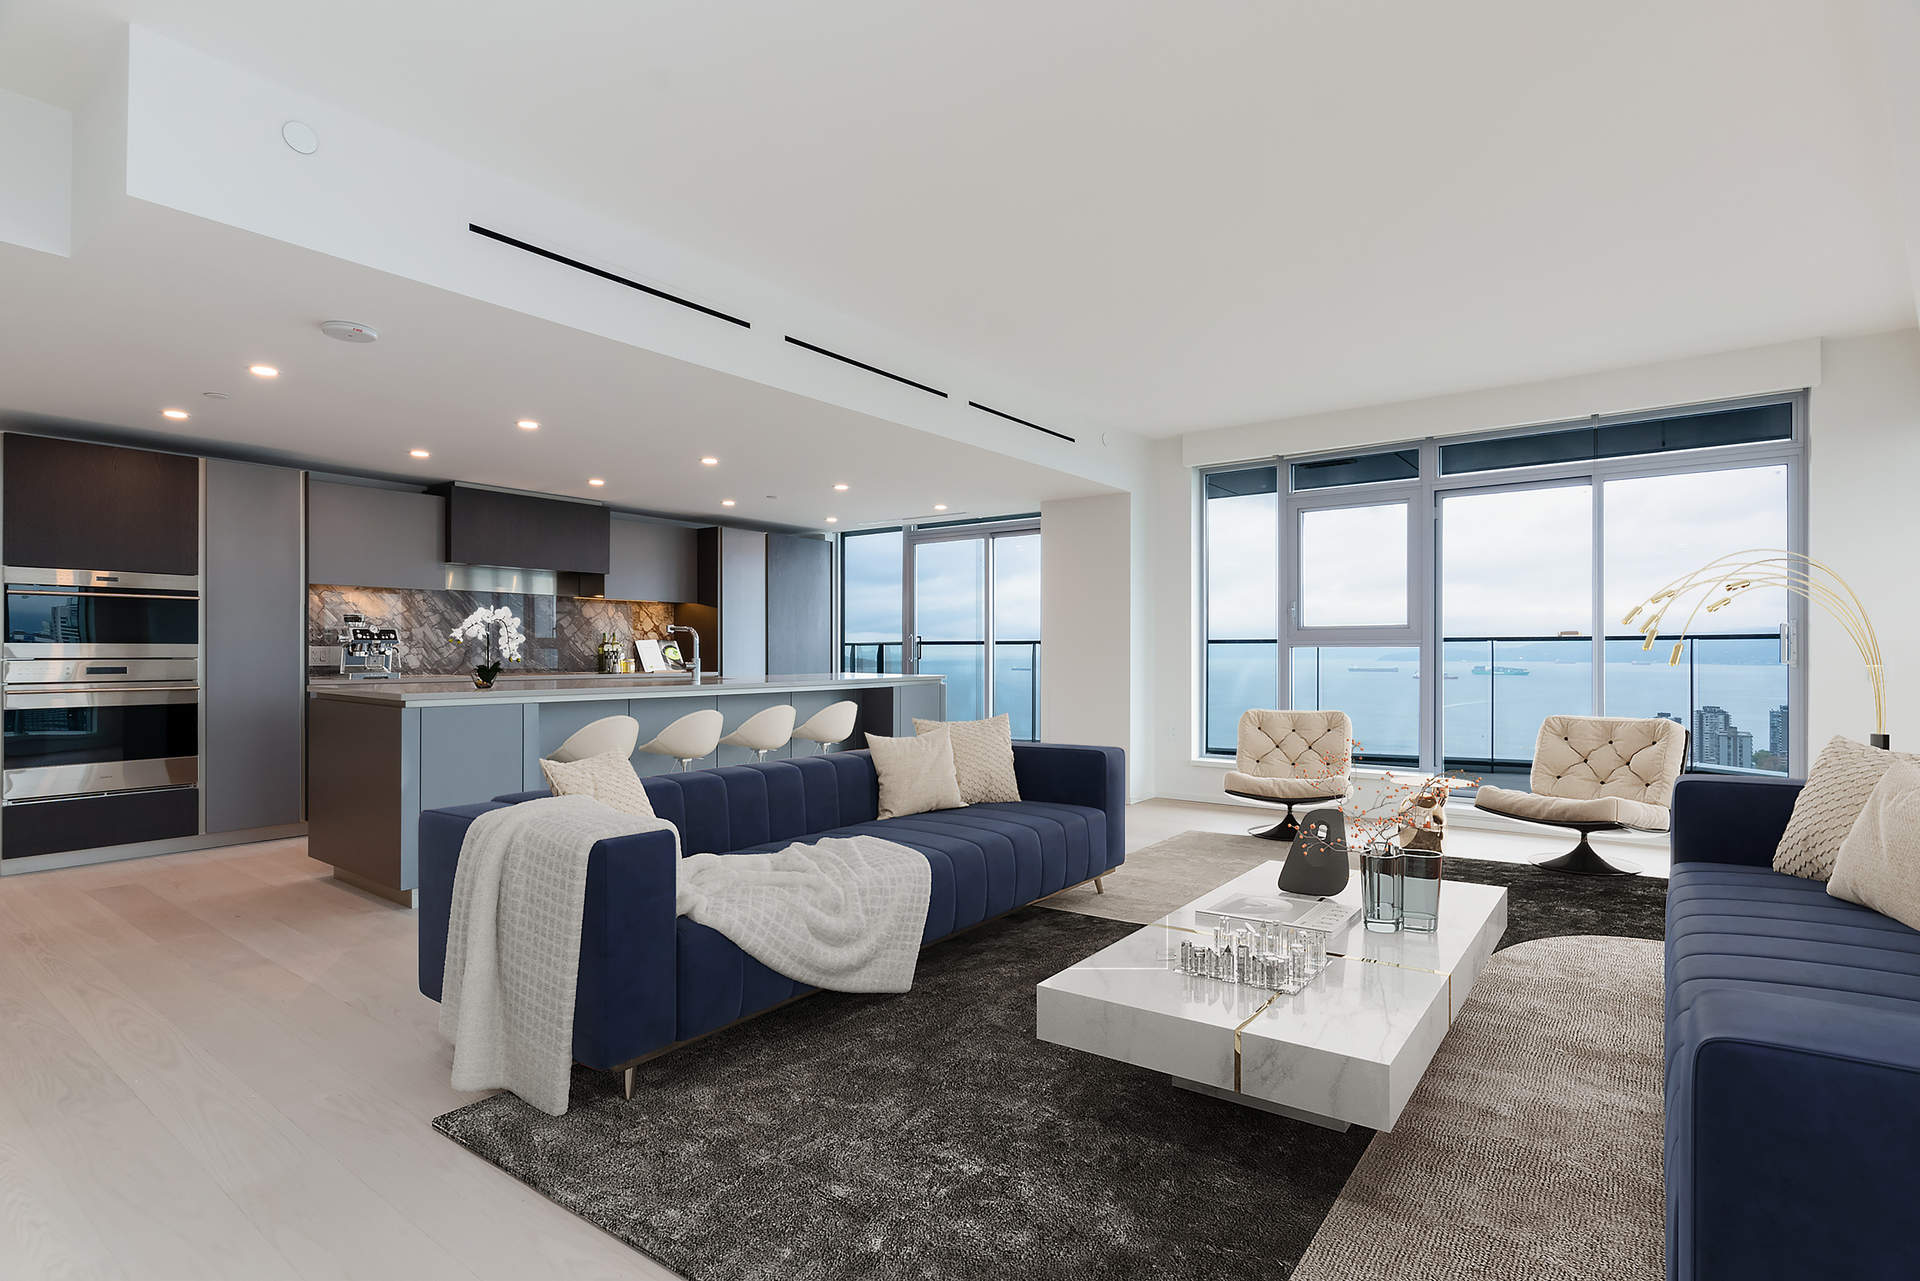 The Pacific by Grosvenor – Penthouse 02, 2,675 sf - 1,020 sf of roof terrace! 